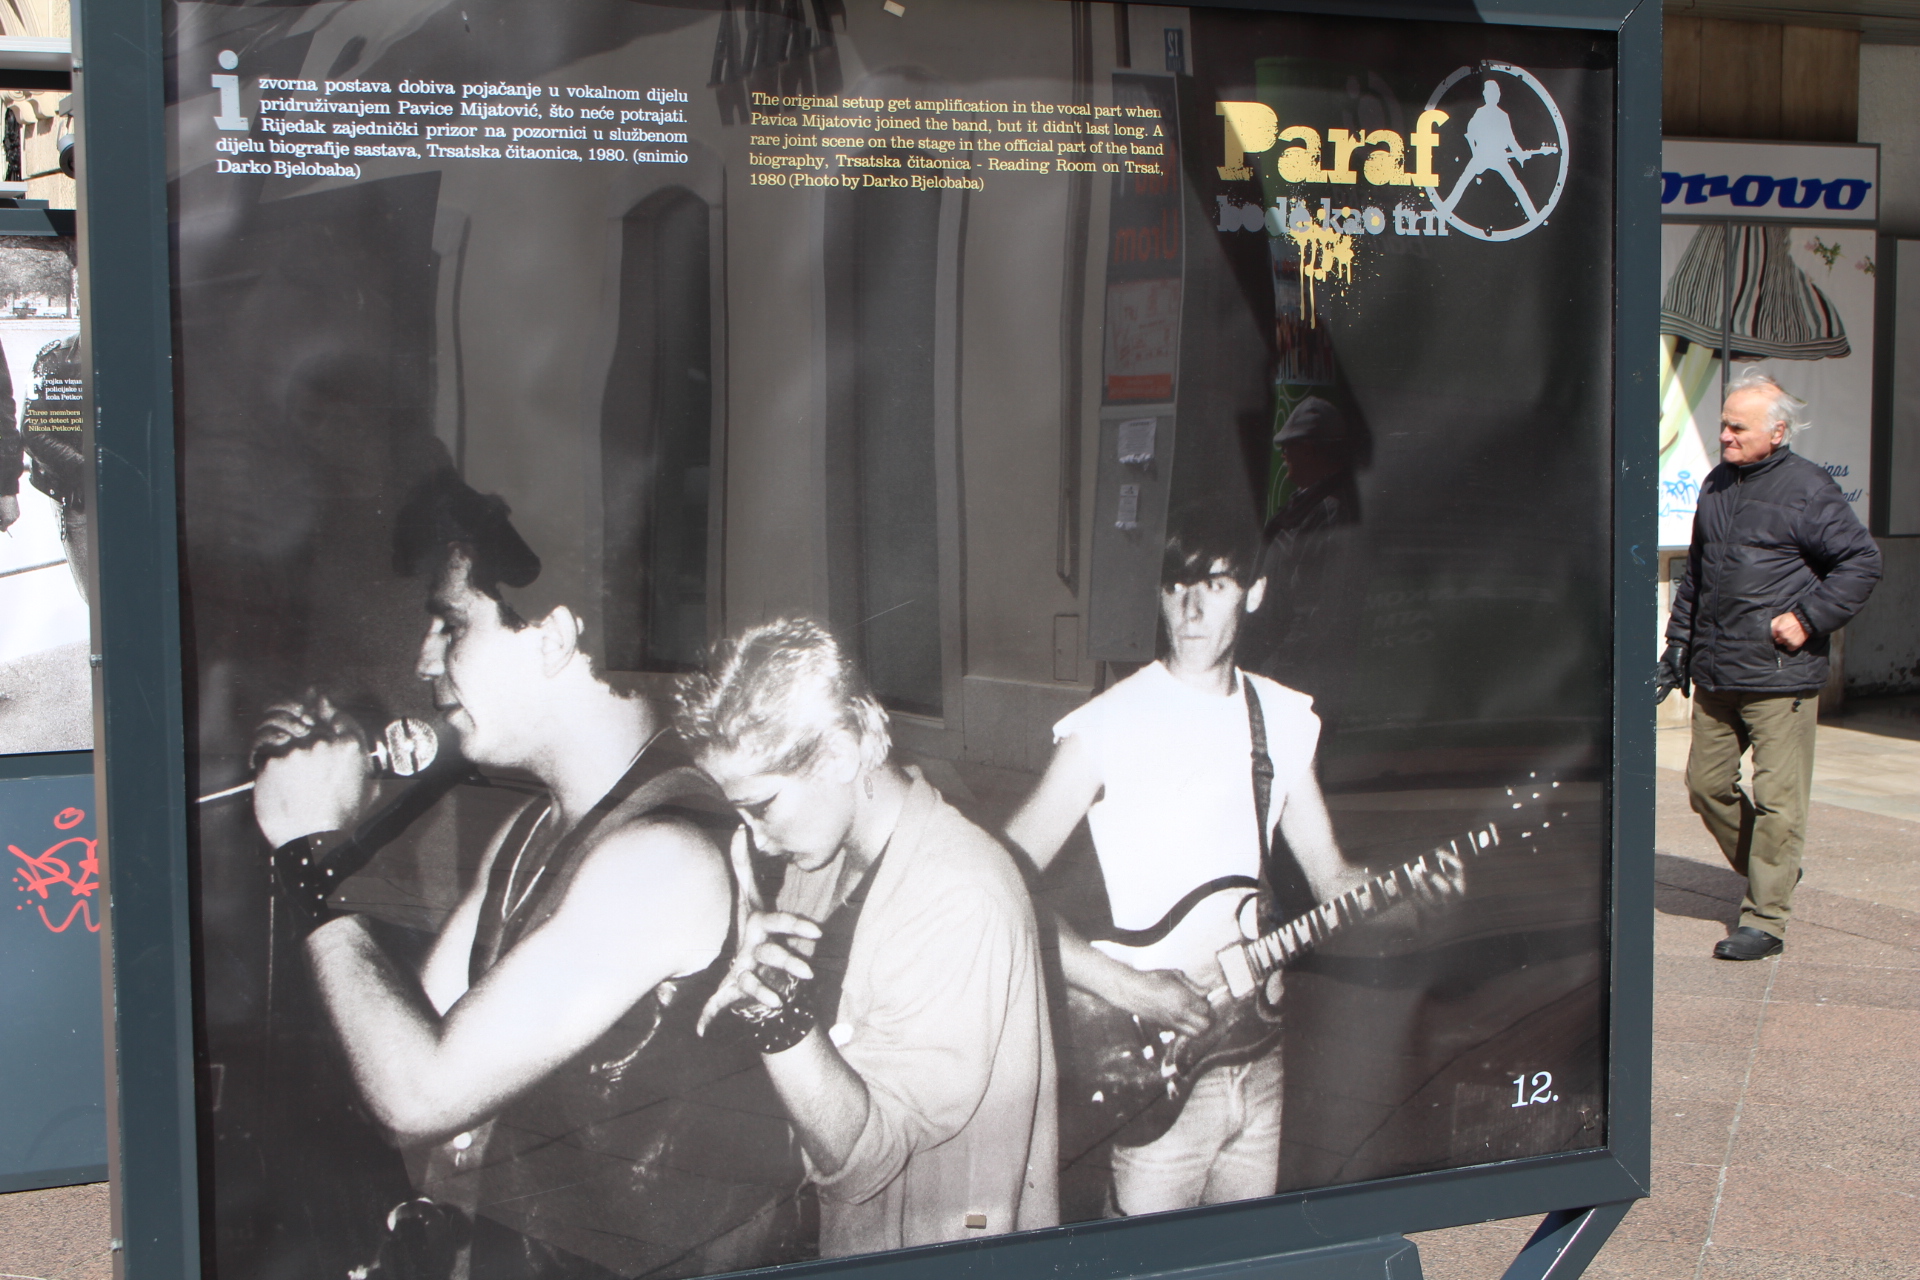 Photography from the of the exhibition that was organized by Velid Đekić in 2018 on the fortieth anniversary of the first official concert by the Rijeka punk band Paraf.